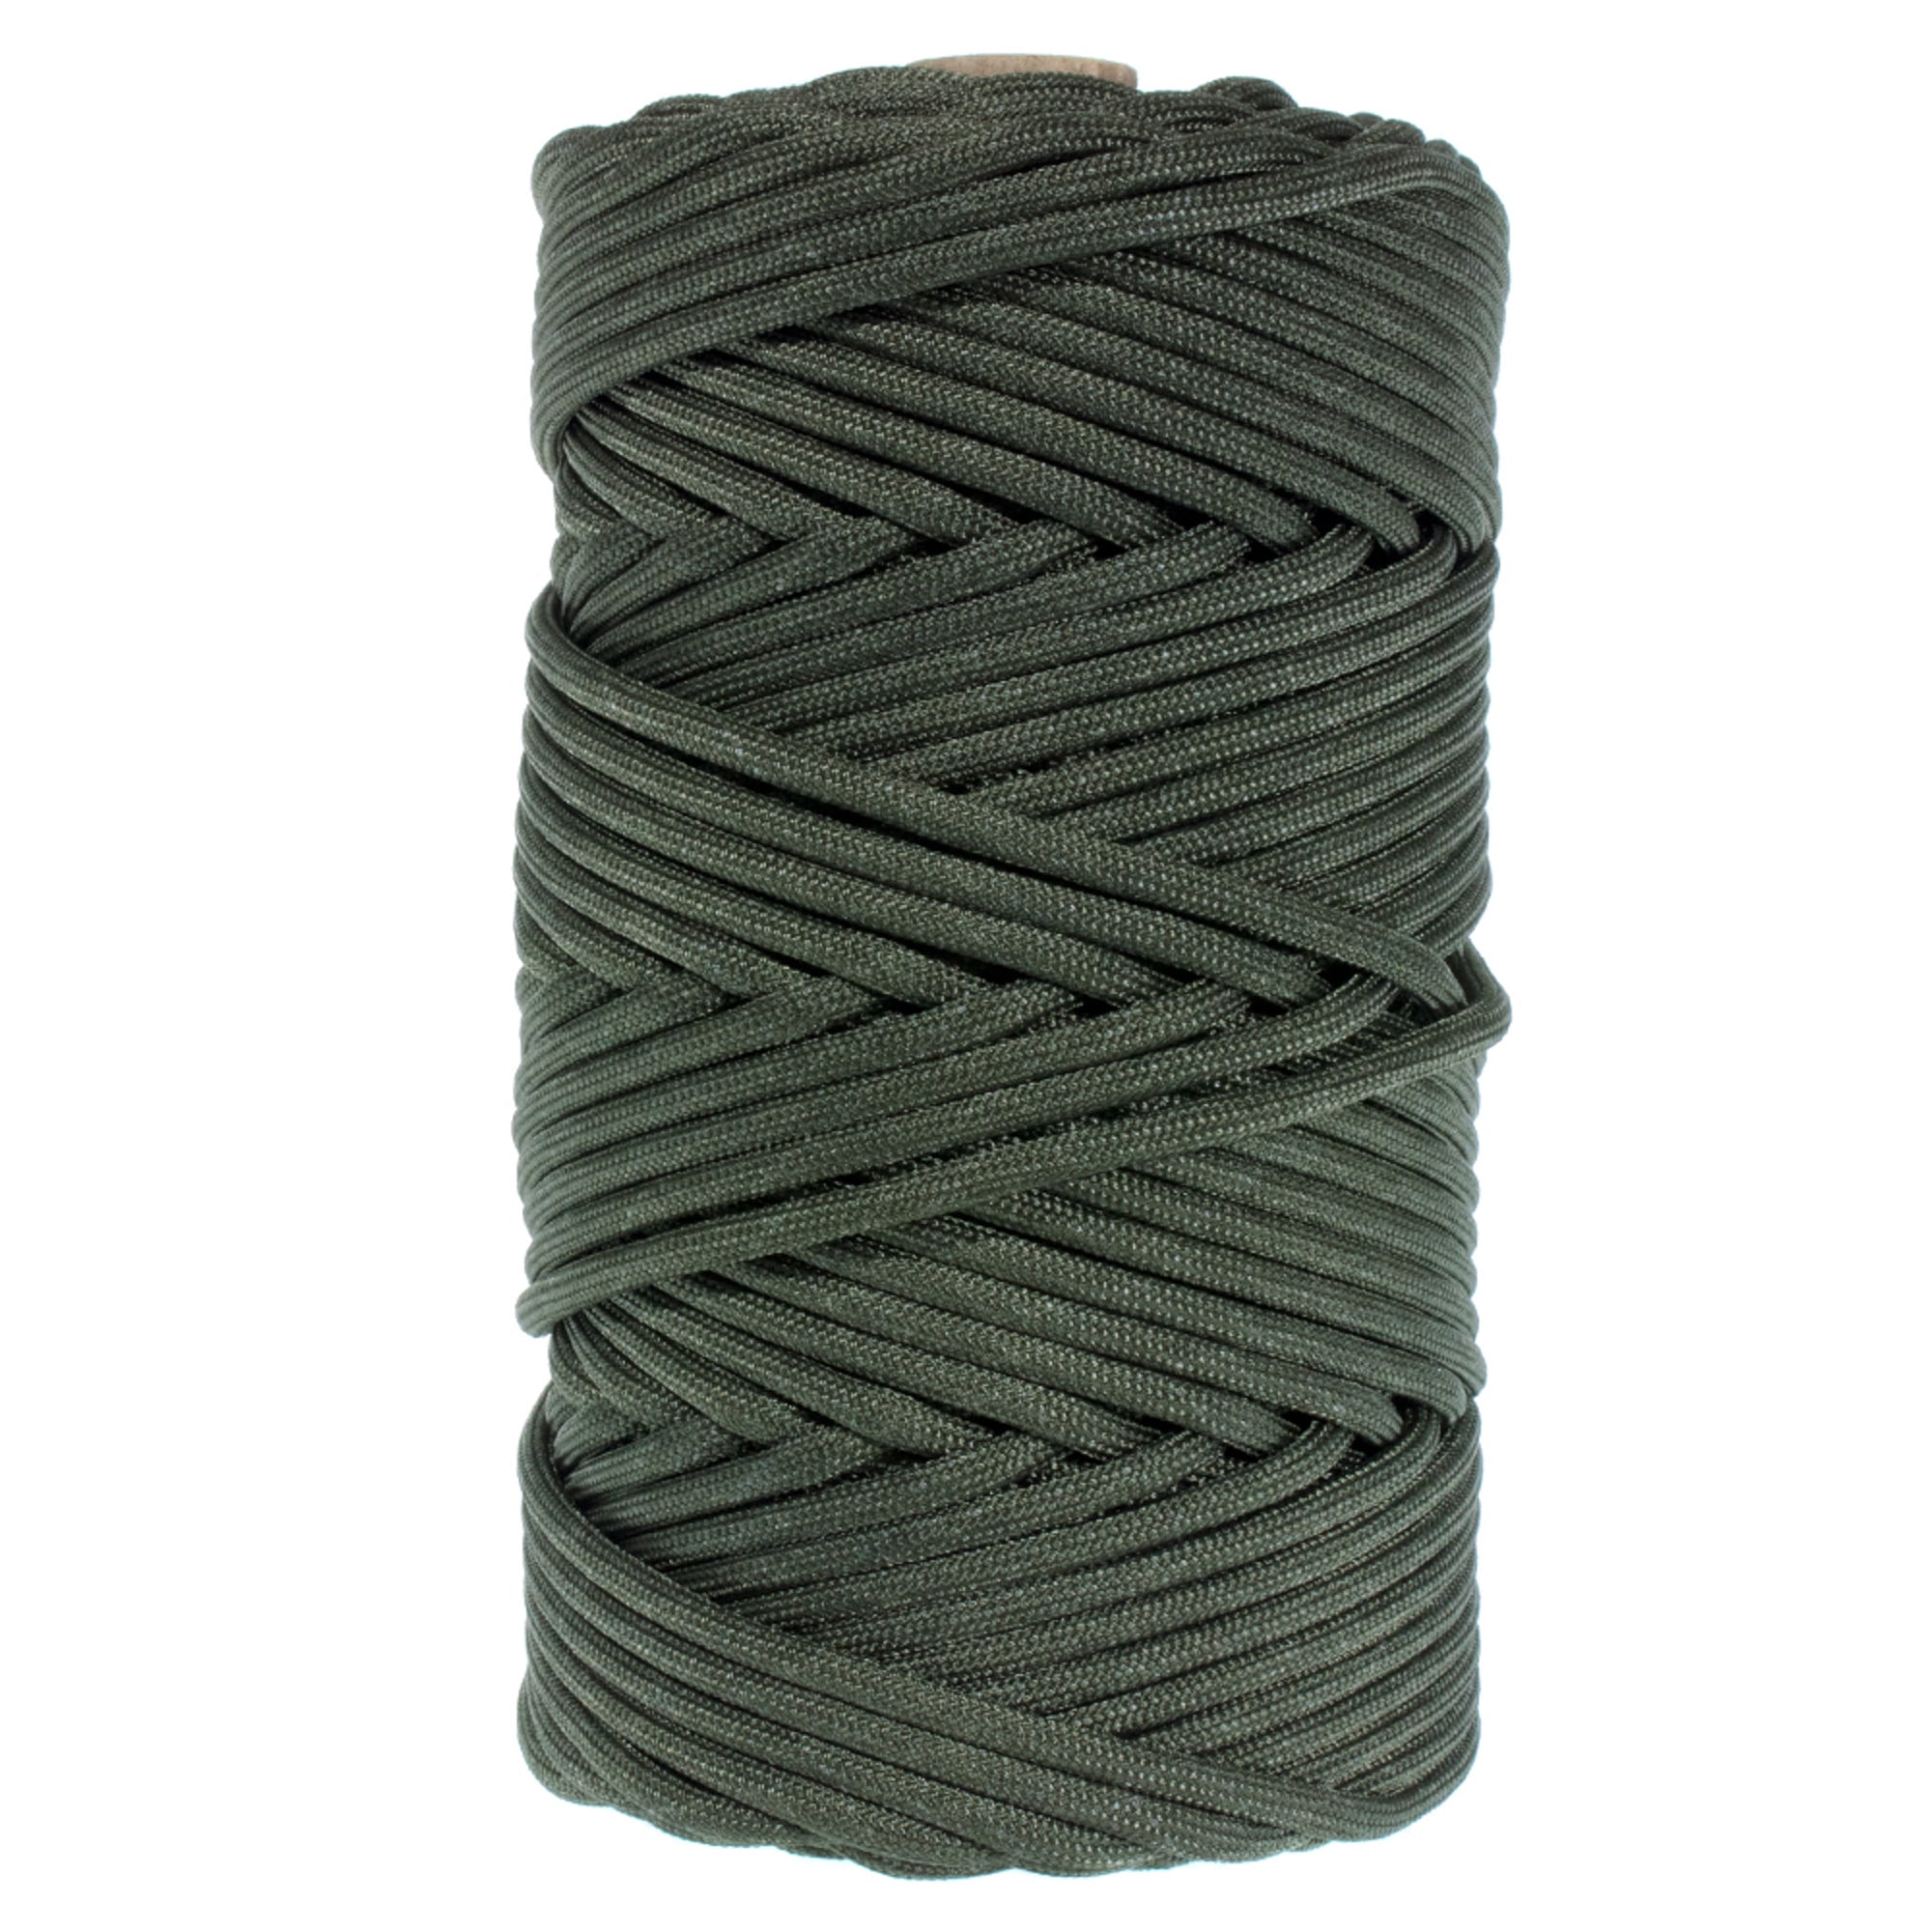 Type III 550lb 100Ft Paracord Made in USA Sea Blue MIl-C-5040 - 100% Nylon 